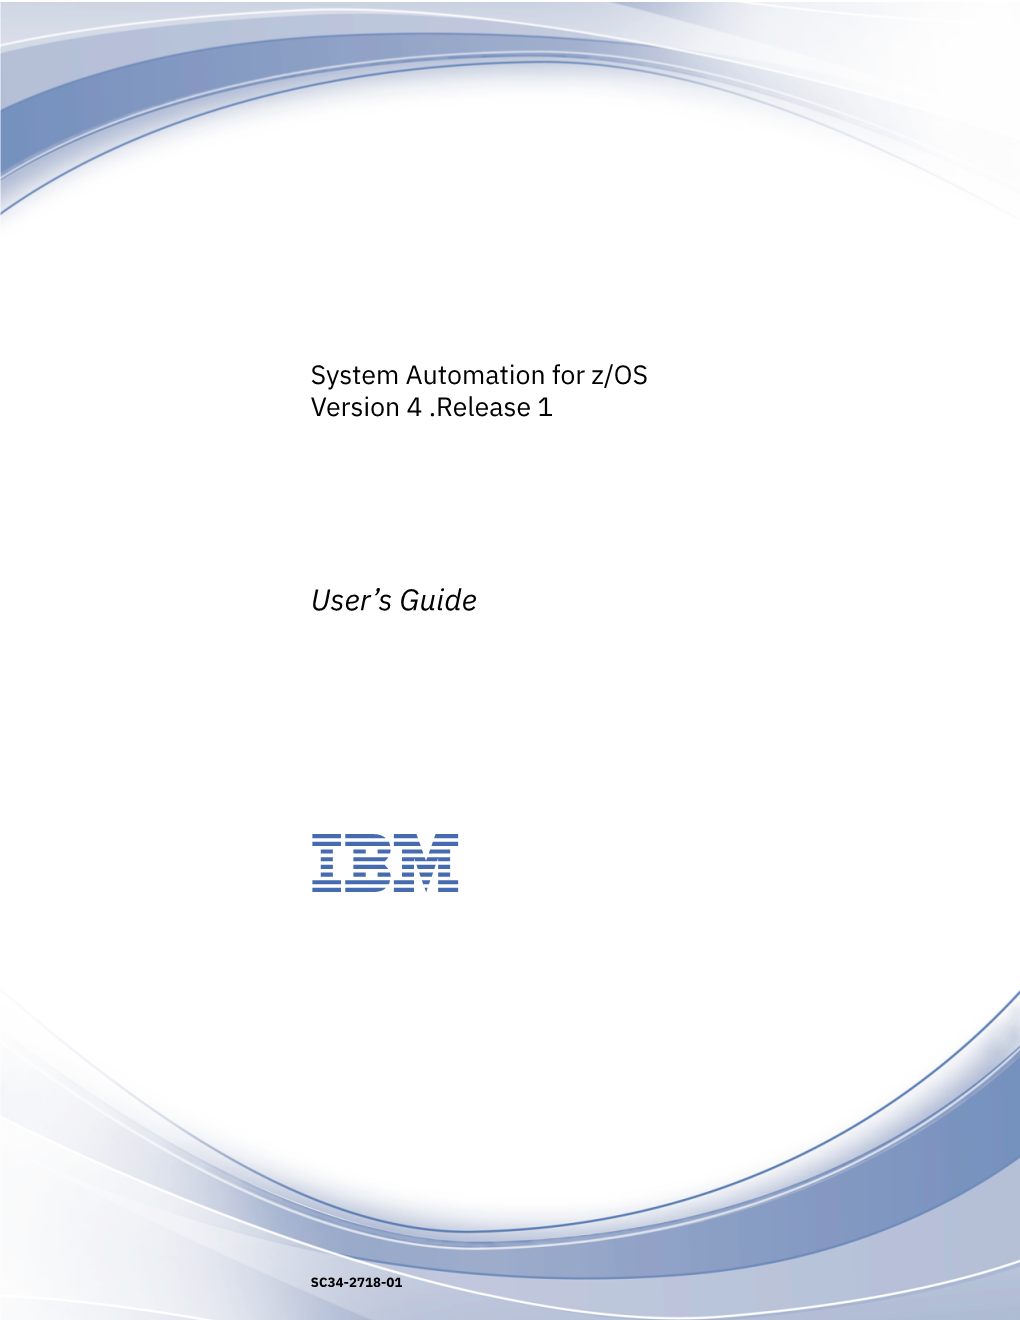 System Automation for Z/OS: User's Guide